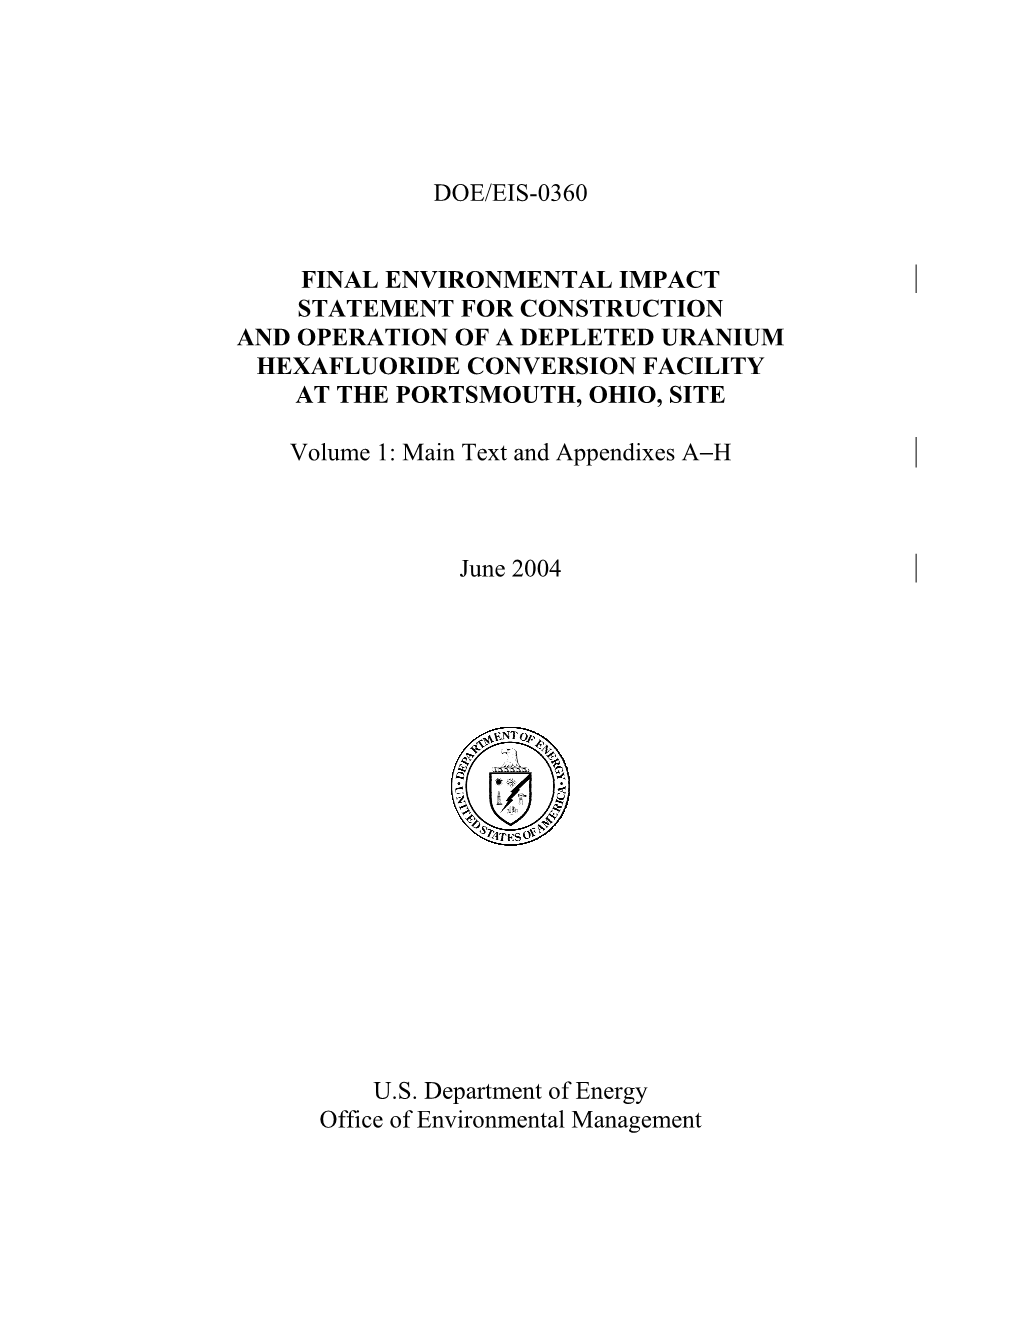 Final Environmental Impact Statement for Construction and Operation of a Depleted Uranium Hexafluoride Conversion Facility at the Portsmouth, Ohio, Site